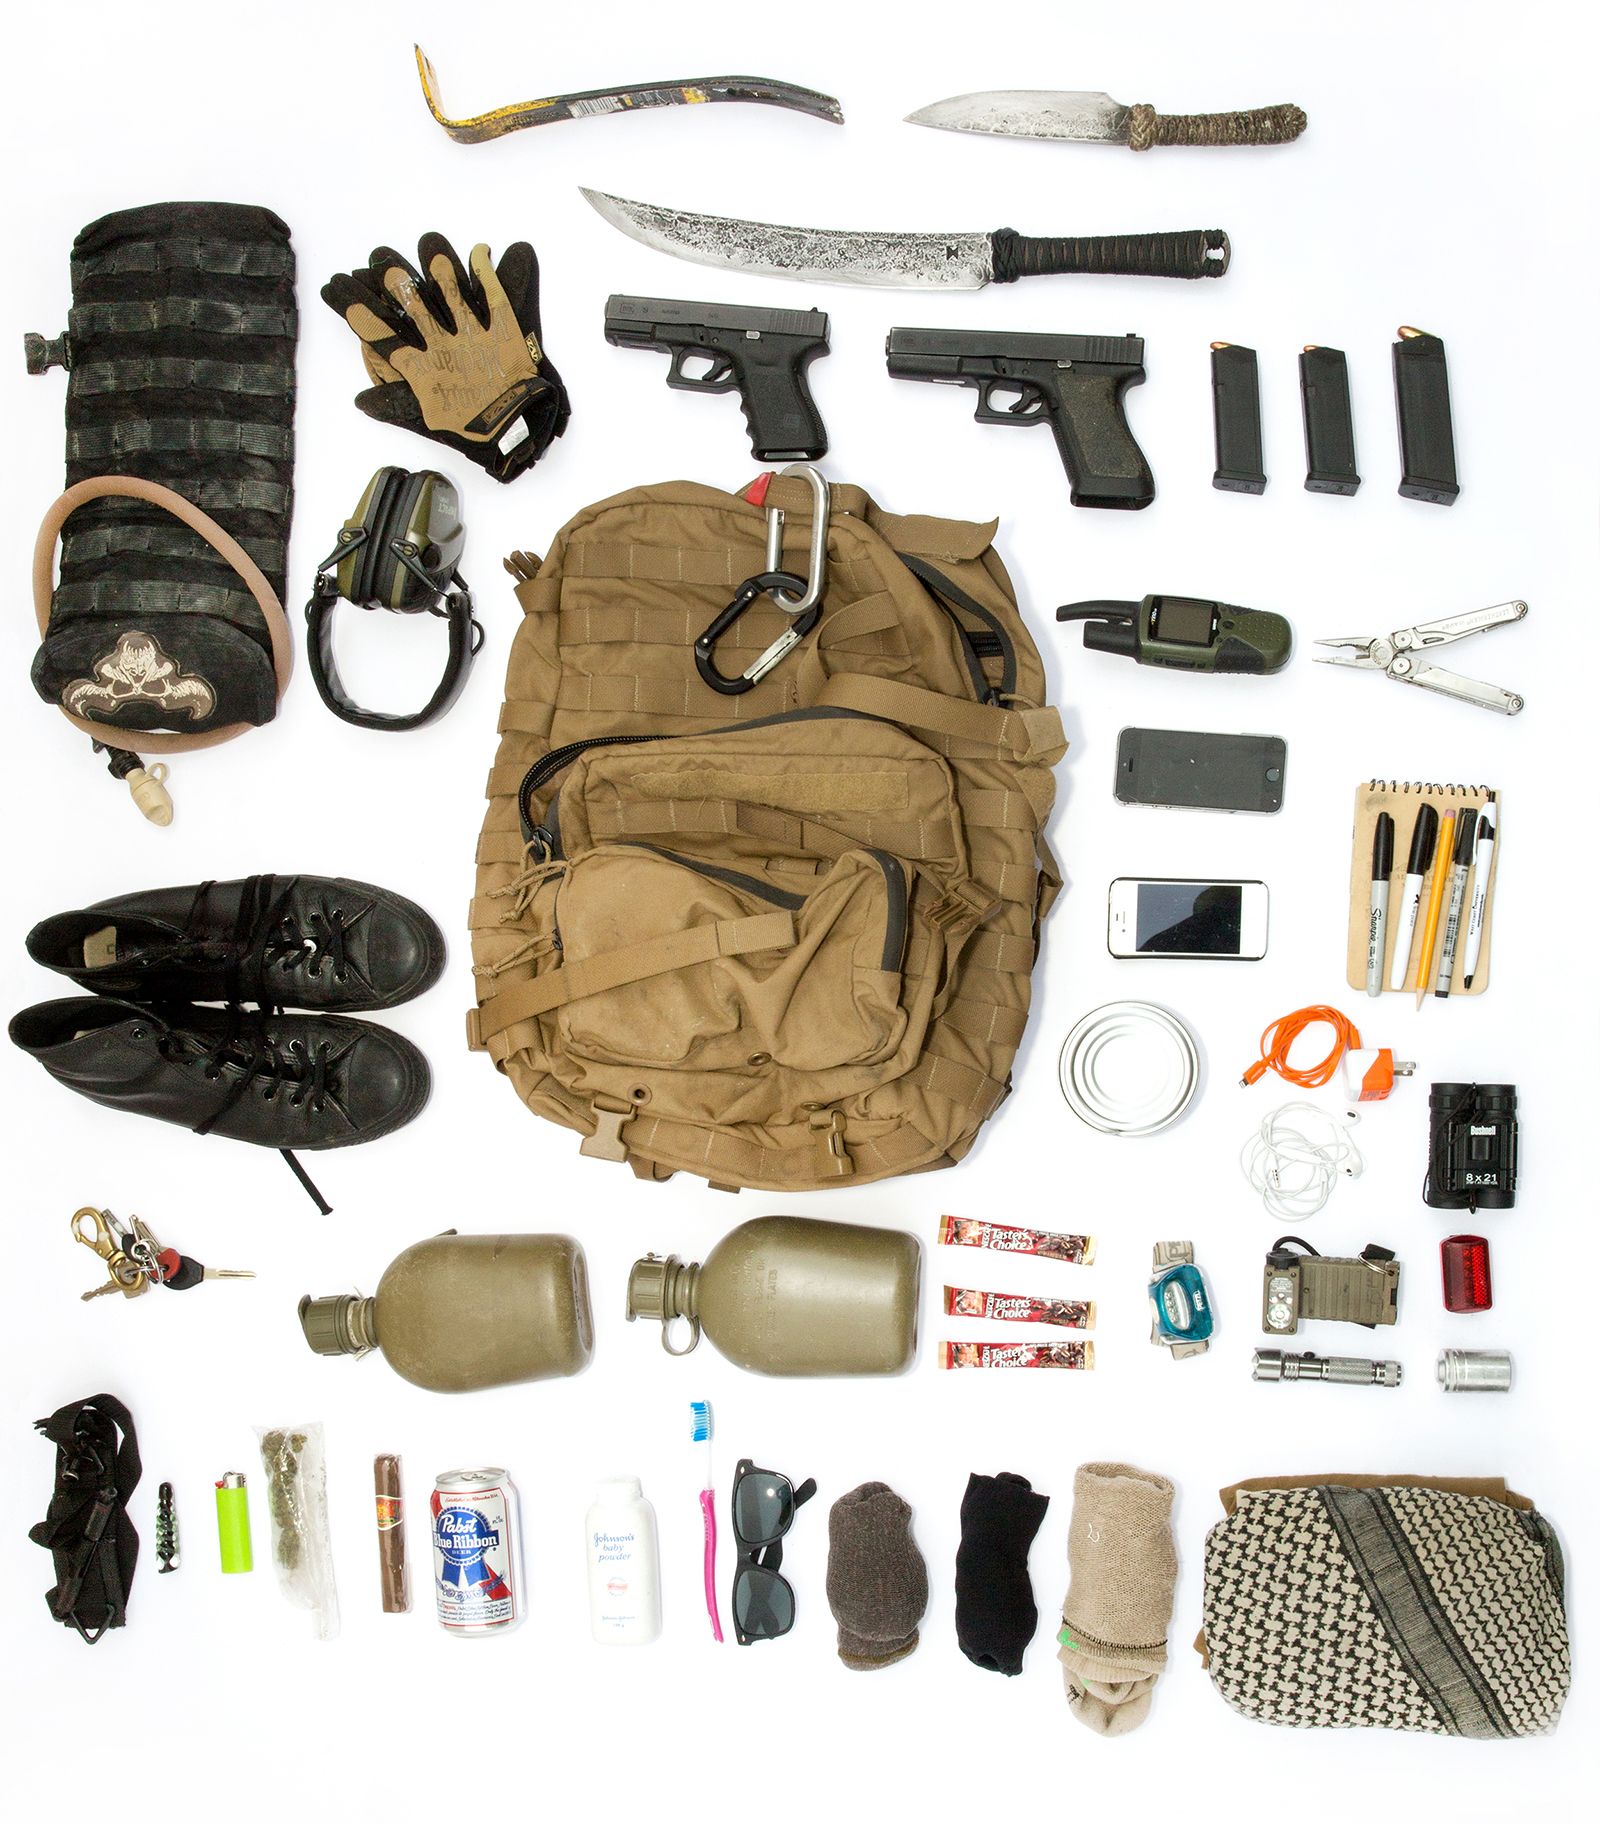 © Allison Stewart - Image from the Bug Out Bag: The Commodification of American Fear photography project